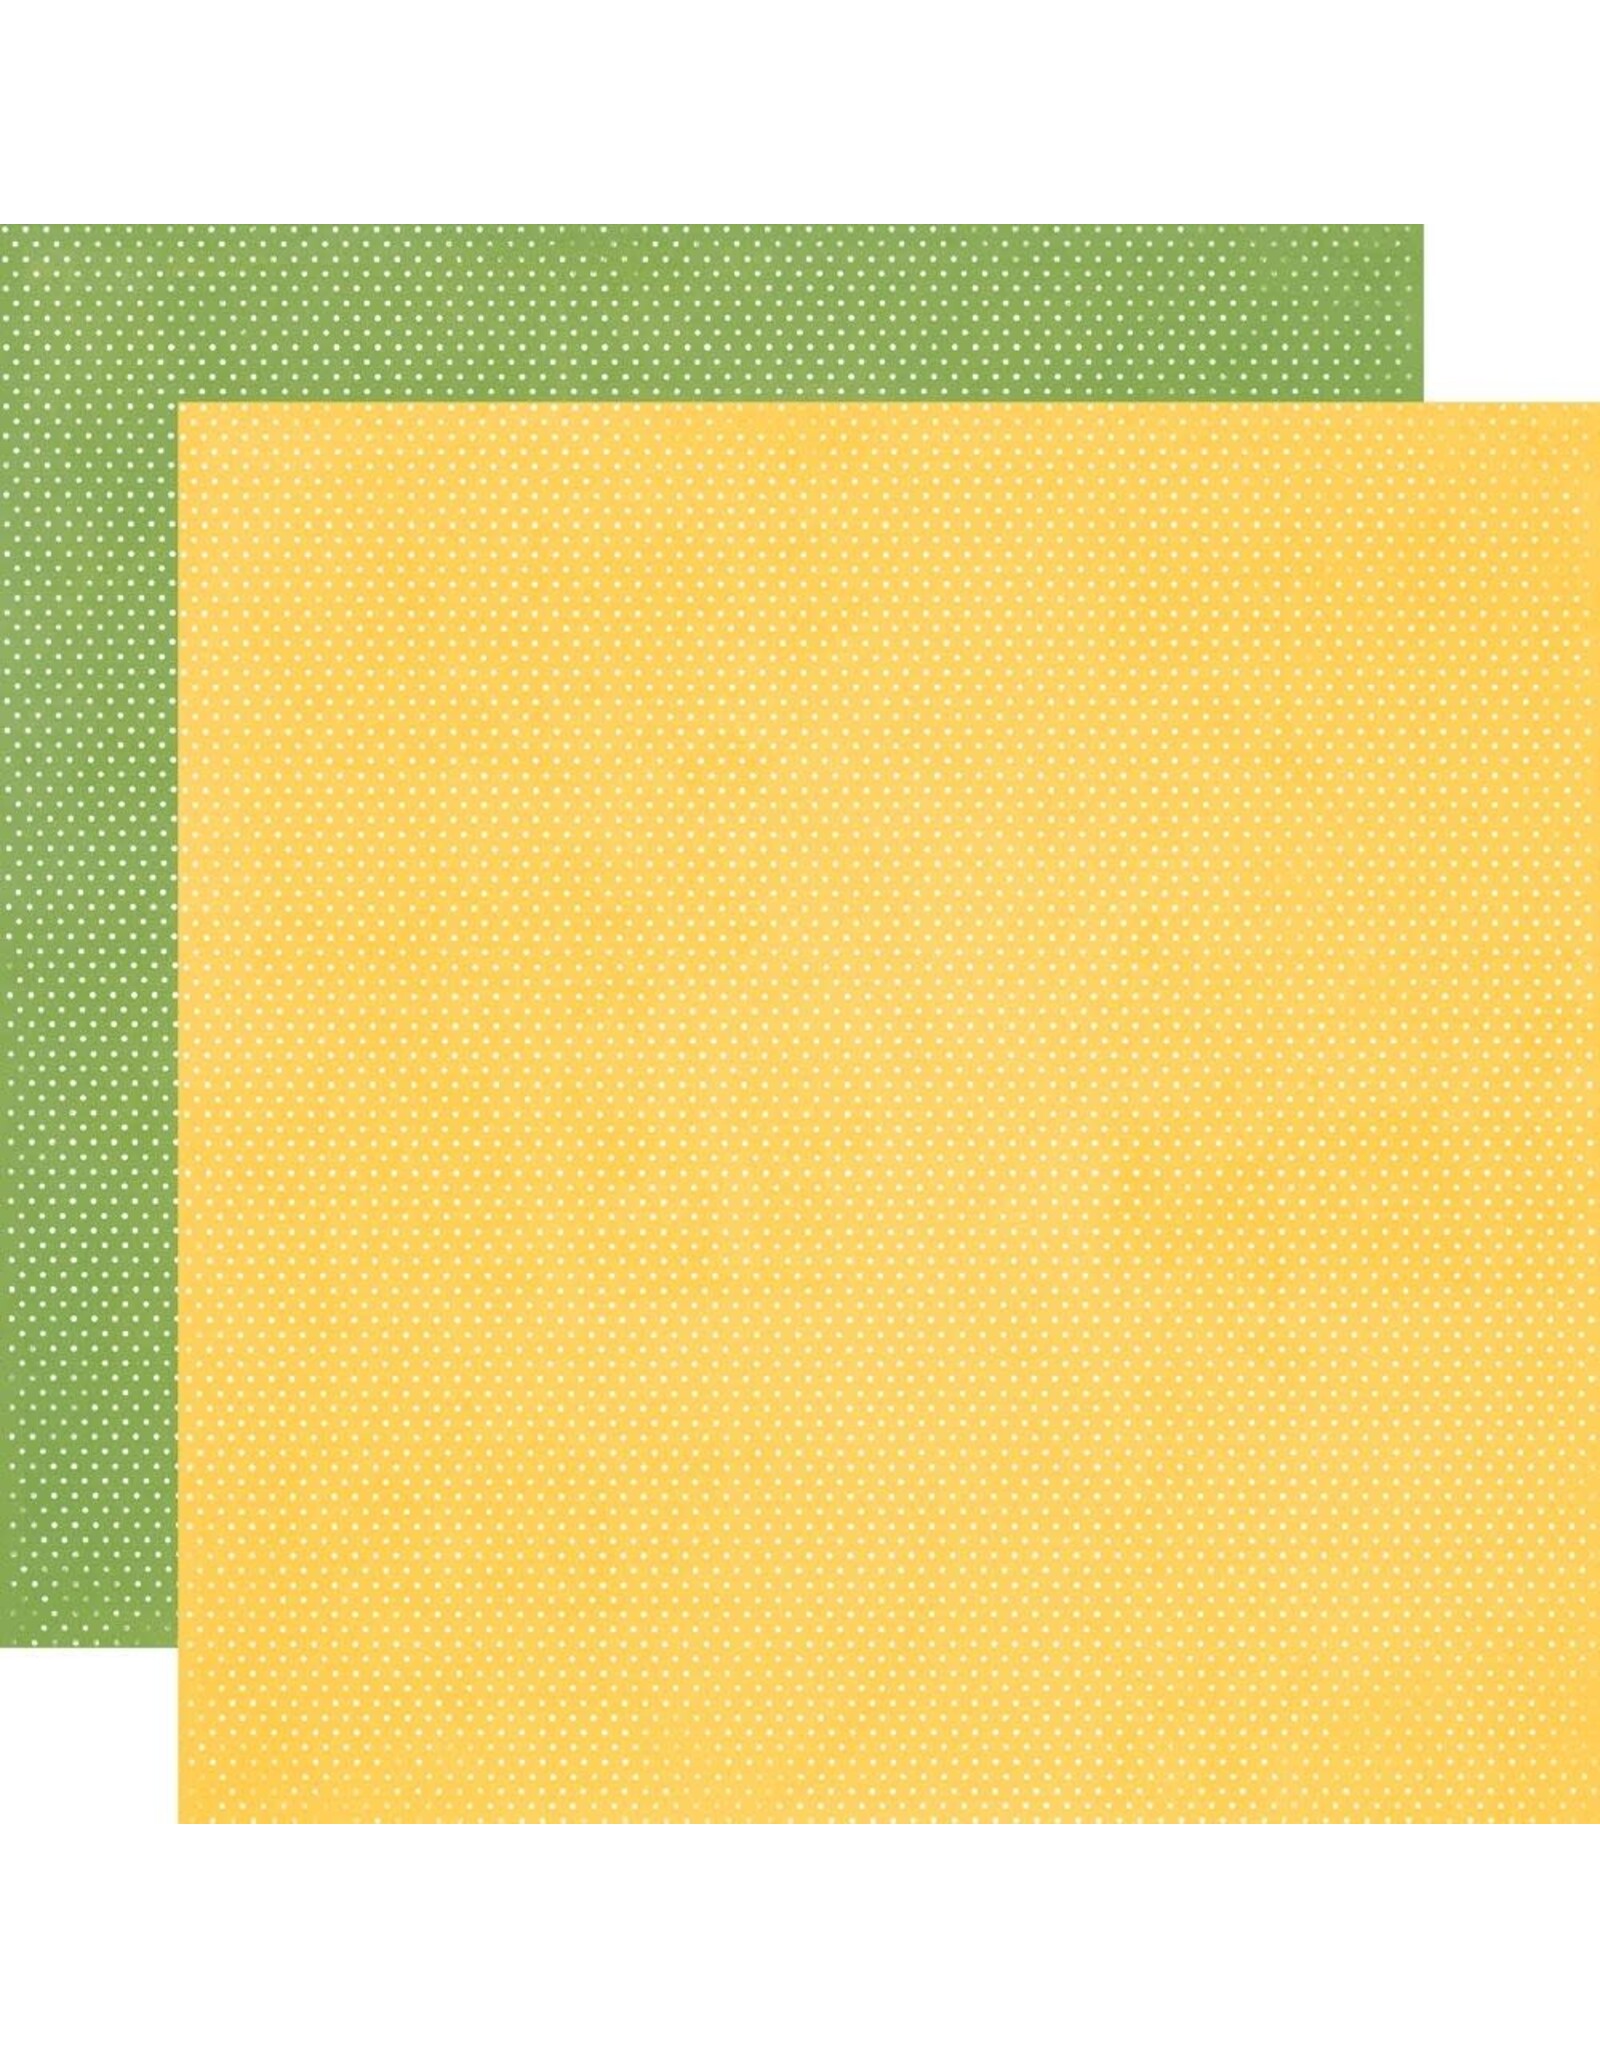 SIMPLE STORIES SIMPLE STORIES SIMPLE VINTAGE ESSENTIALS COLOR PALETTE YELLOW & GREEN DOTS 12x12 CARDSTOCK